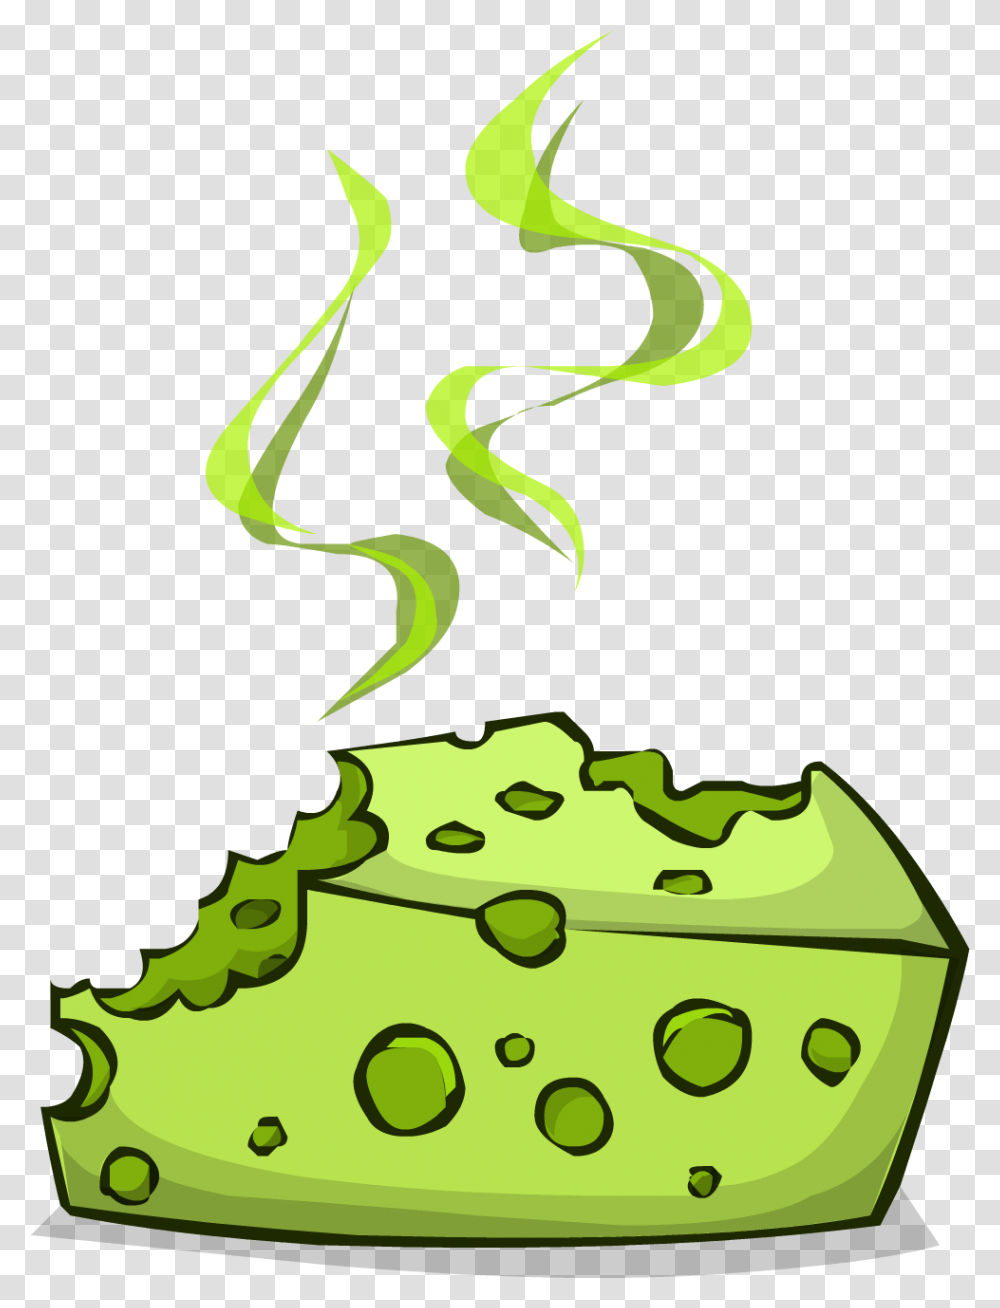 List Of Synonyms And Antonyms Of The Word Stinky Food, Green, Plant Transparent Png